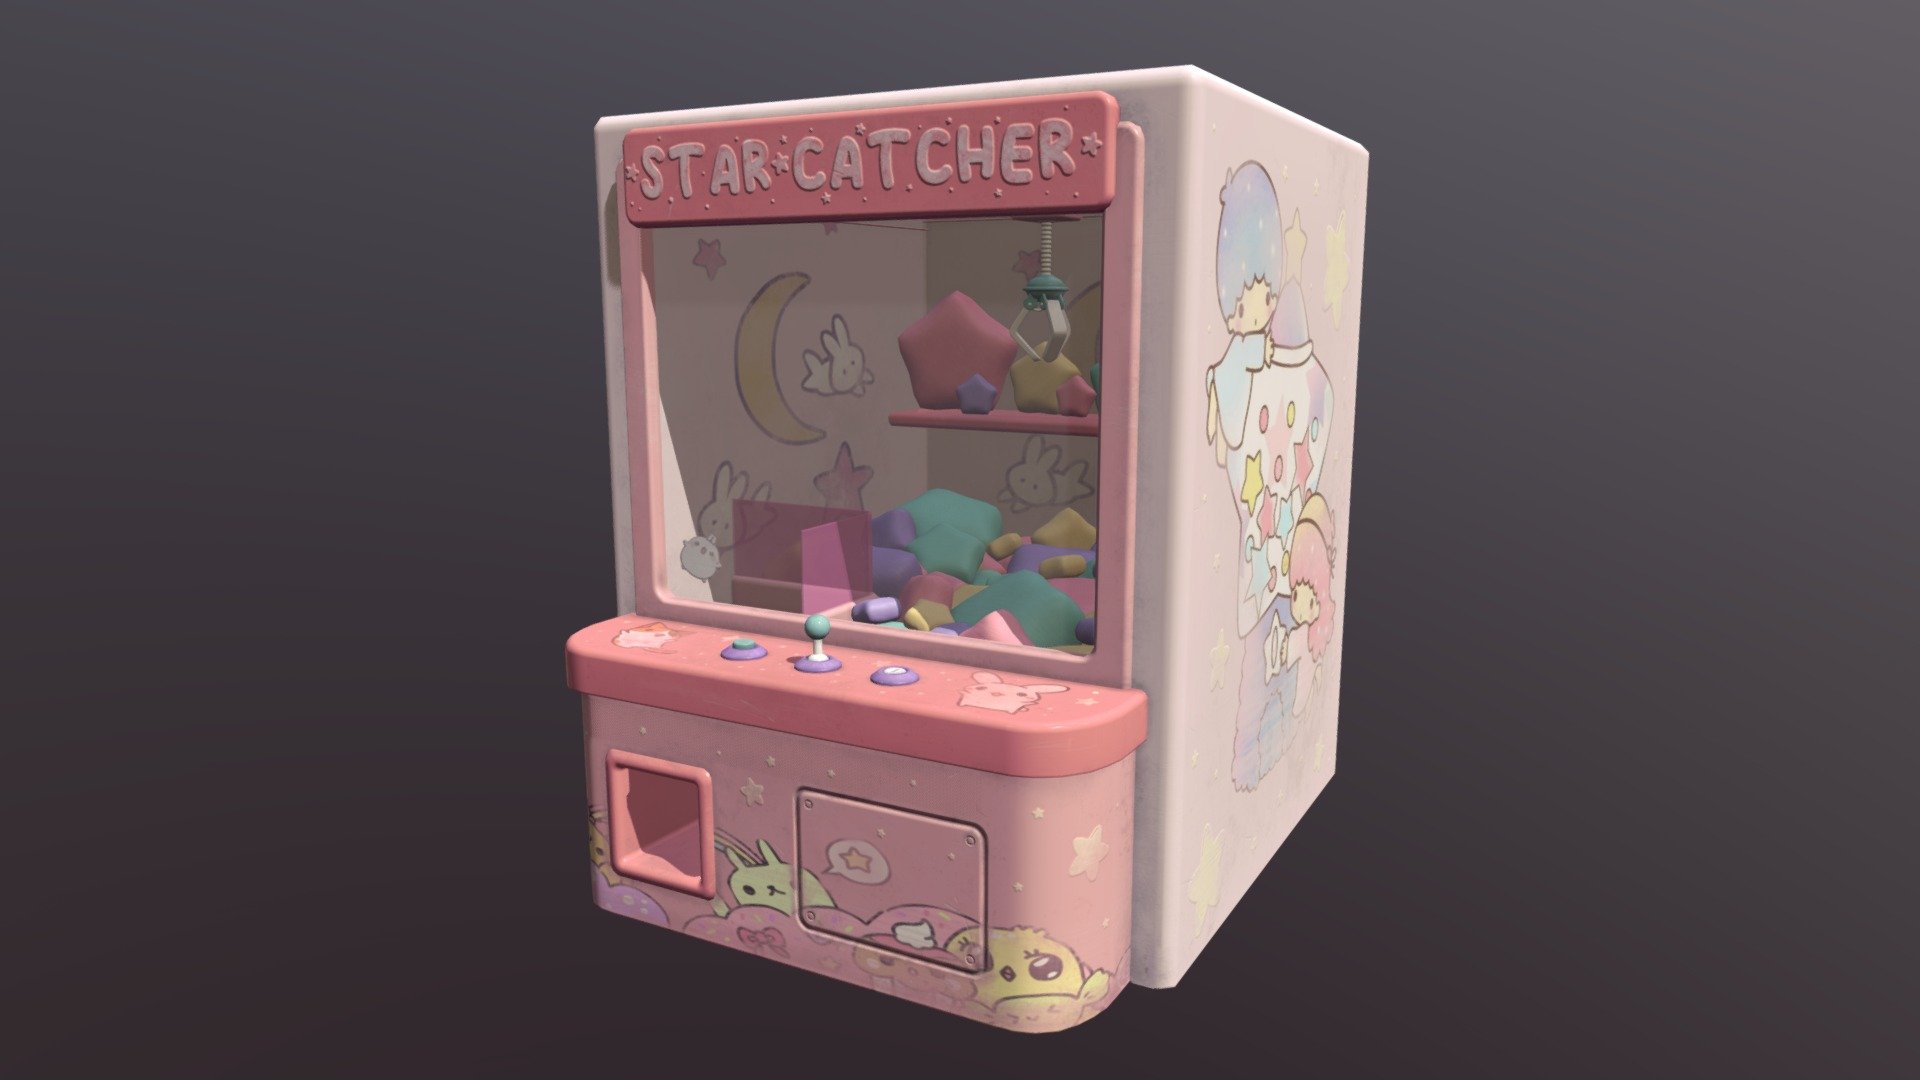 Claw machine (with textures) model by octopushh [db47f6a]